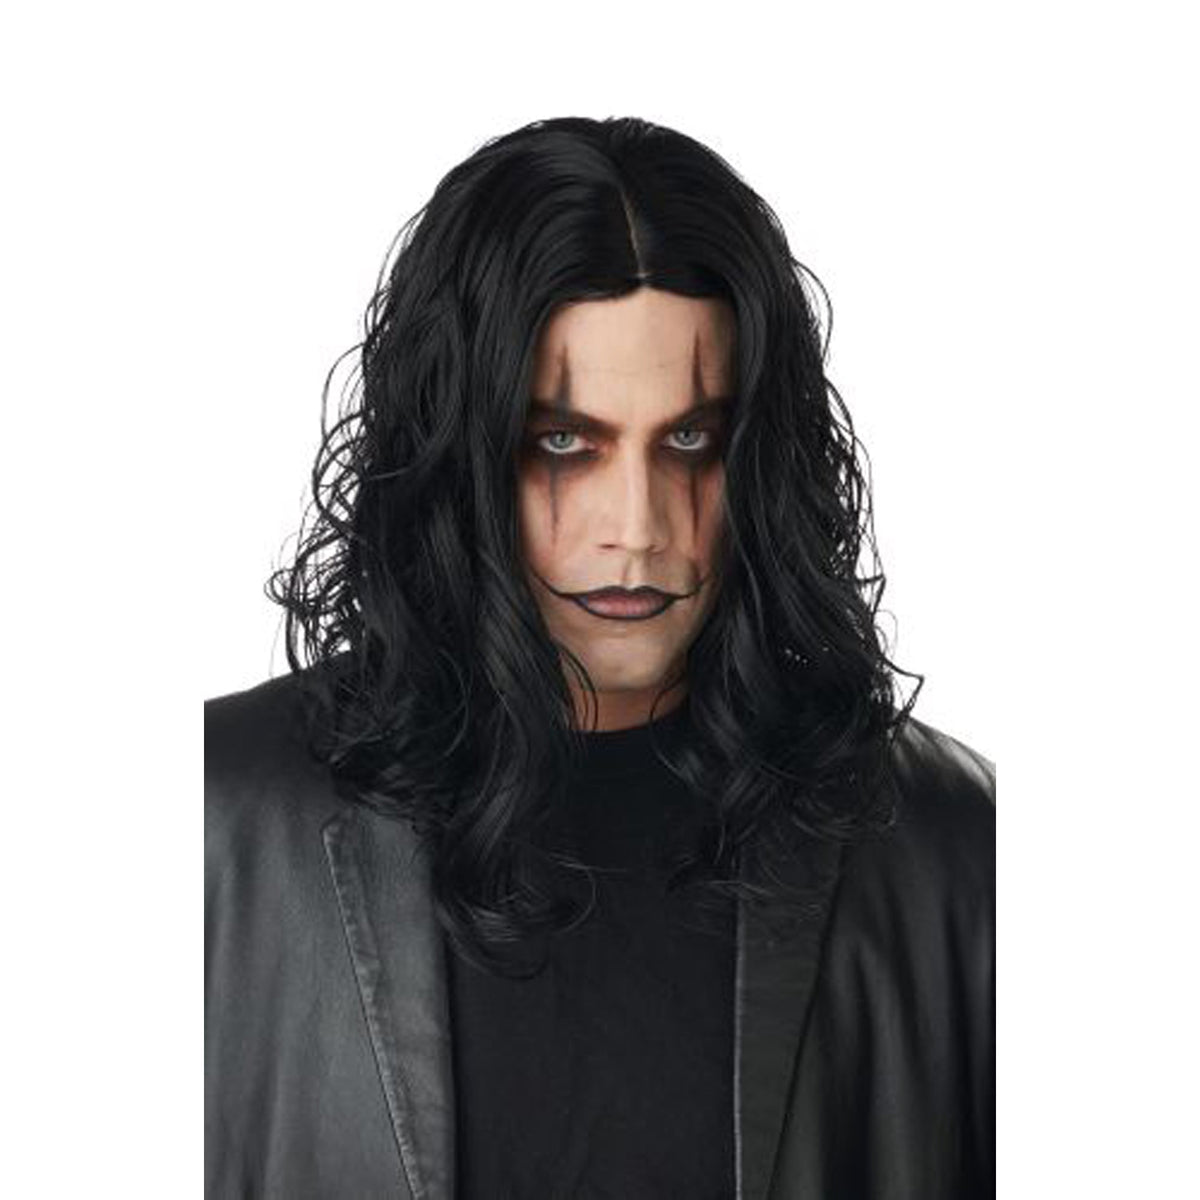 CALIFORNIA COSTUMES Costume Accessories Dark Avenger Wig for Adults 019519181001